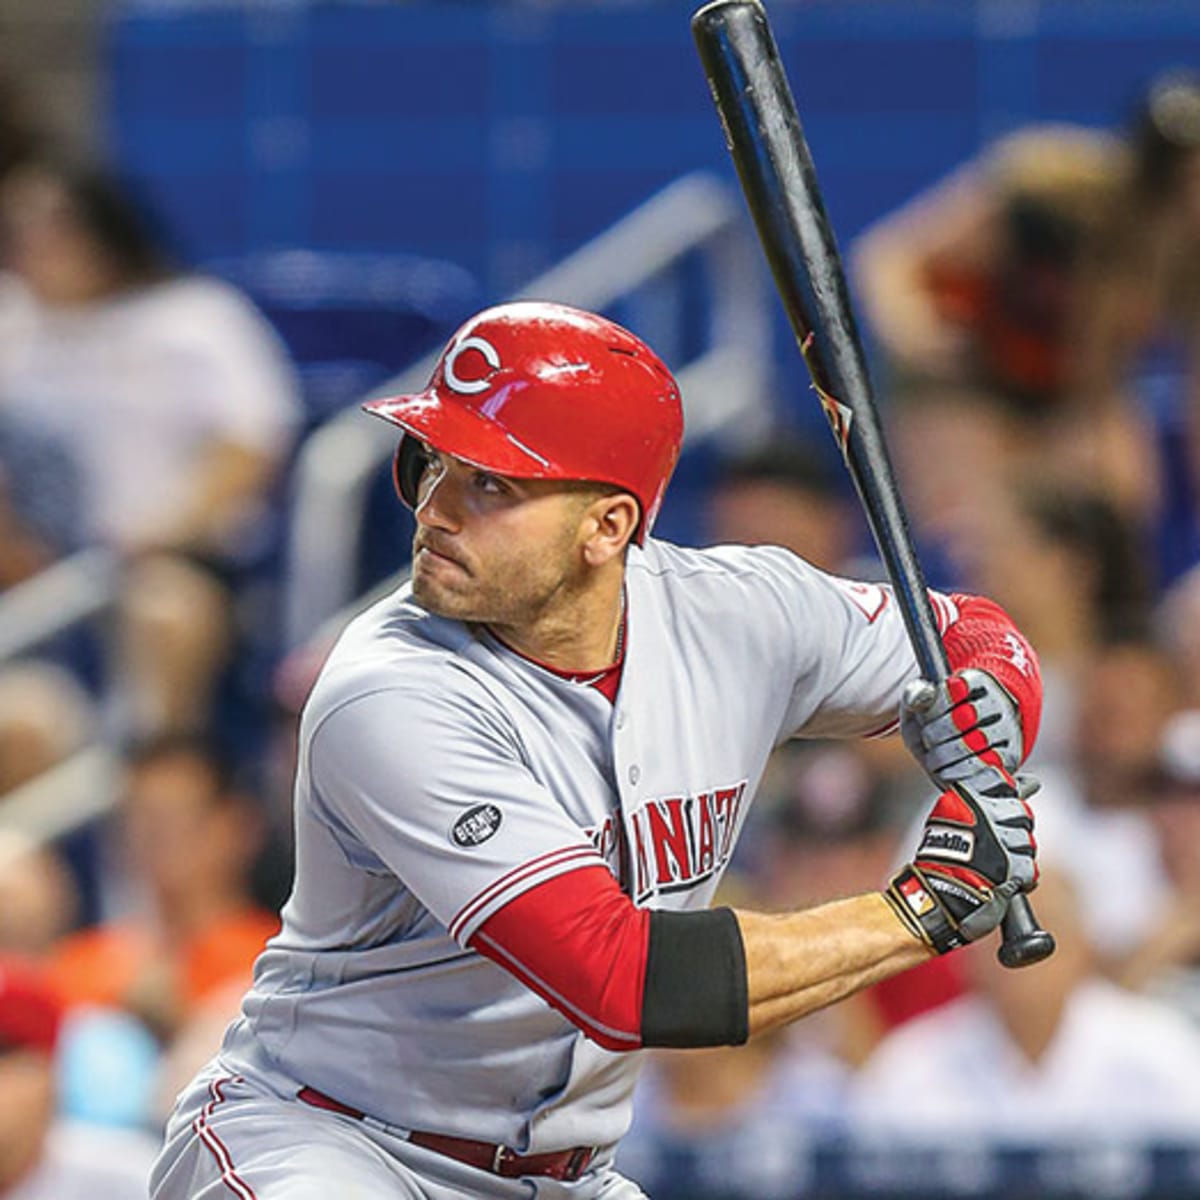 Does Eugenio Suarez's shoulder surgery change the Reds roster? 